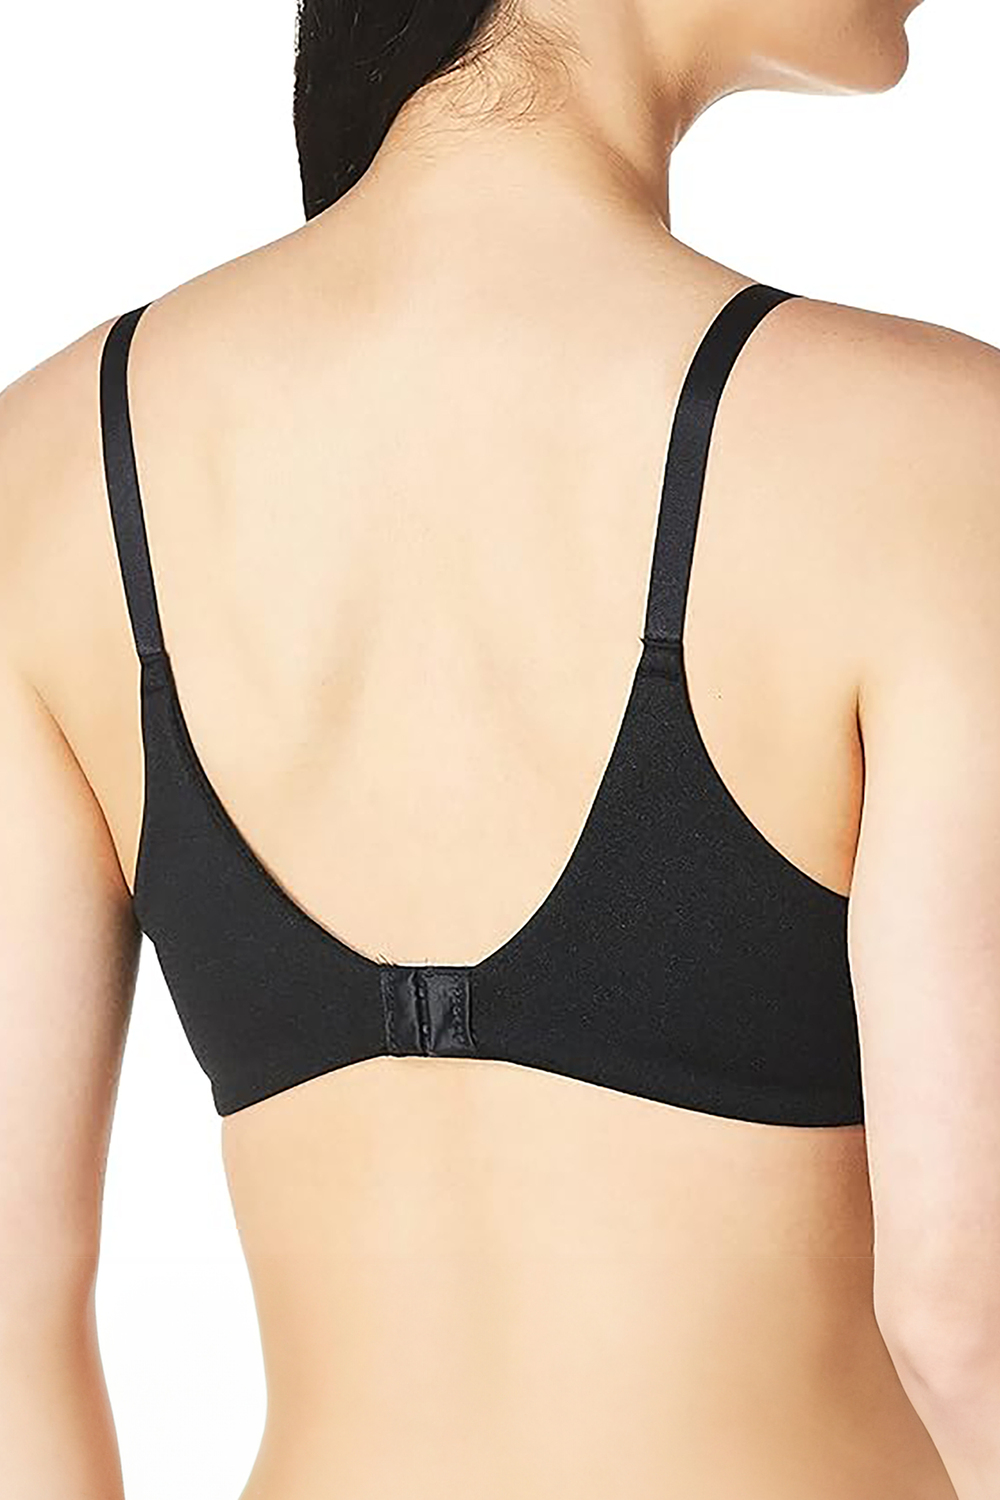 The Breezies® Seamless Comfort Contour Wirefree Bra Is Back